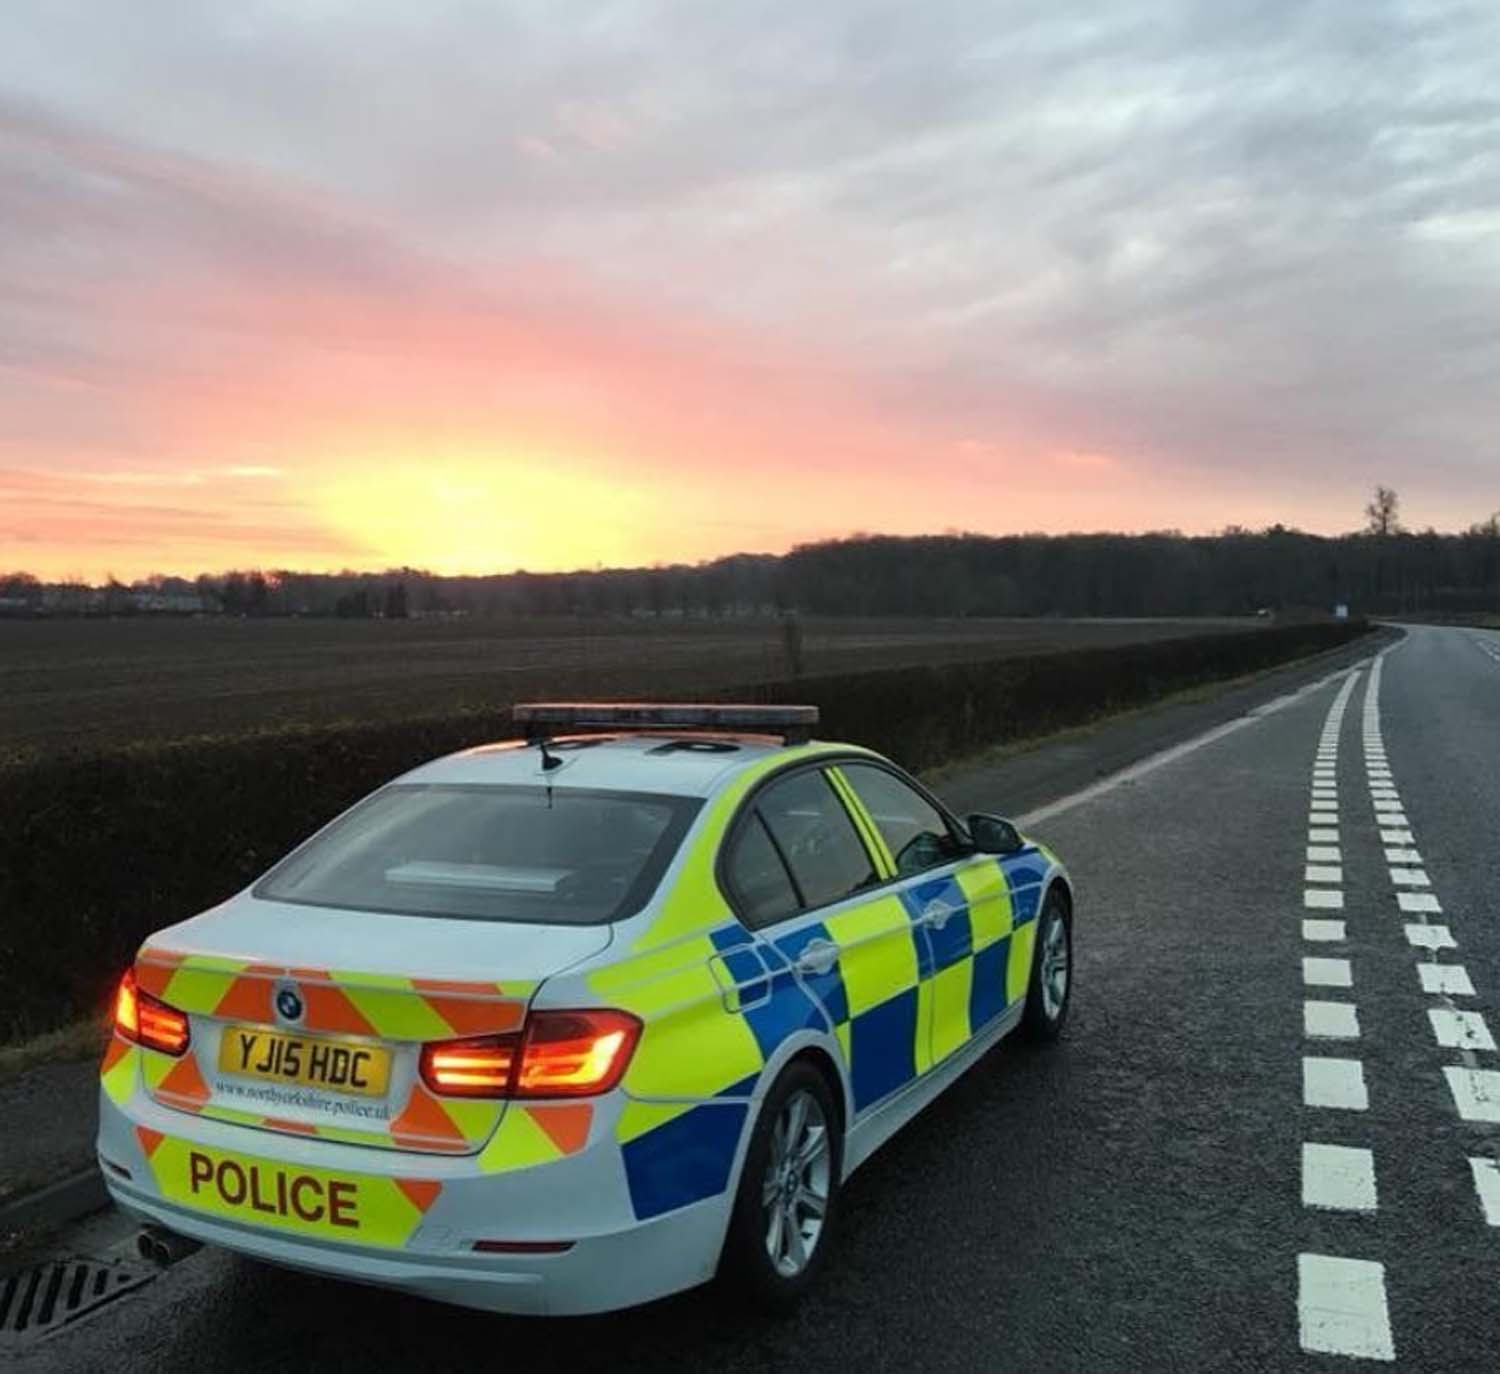 Sunrise over the A162 captured by their Roads Policing Group